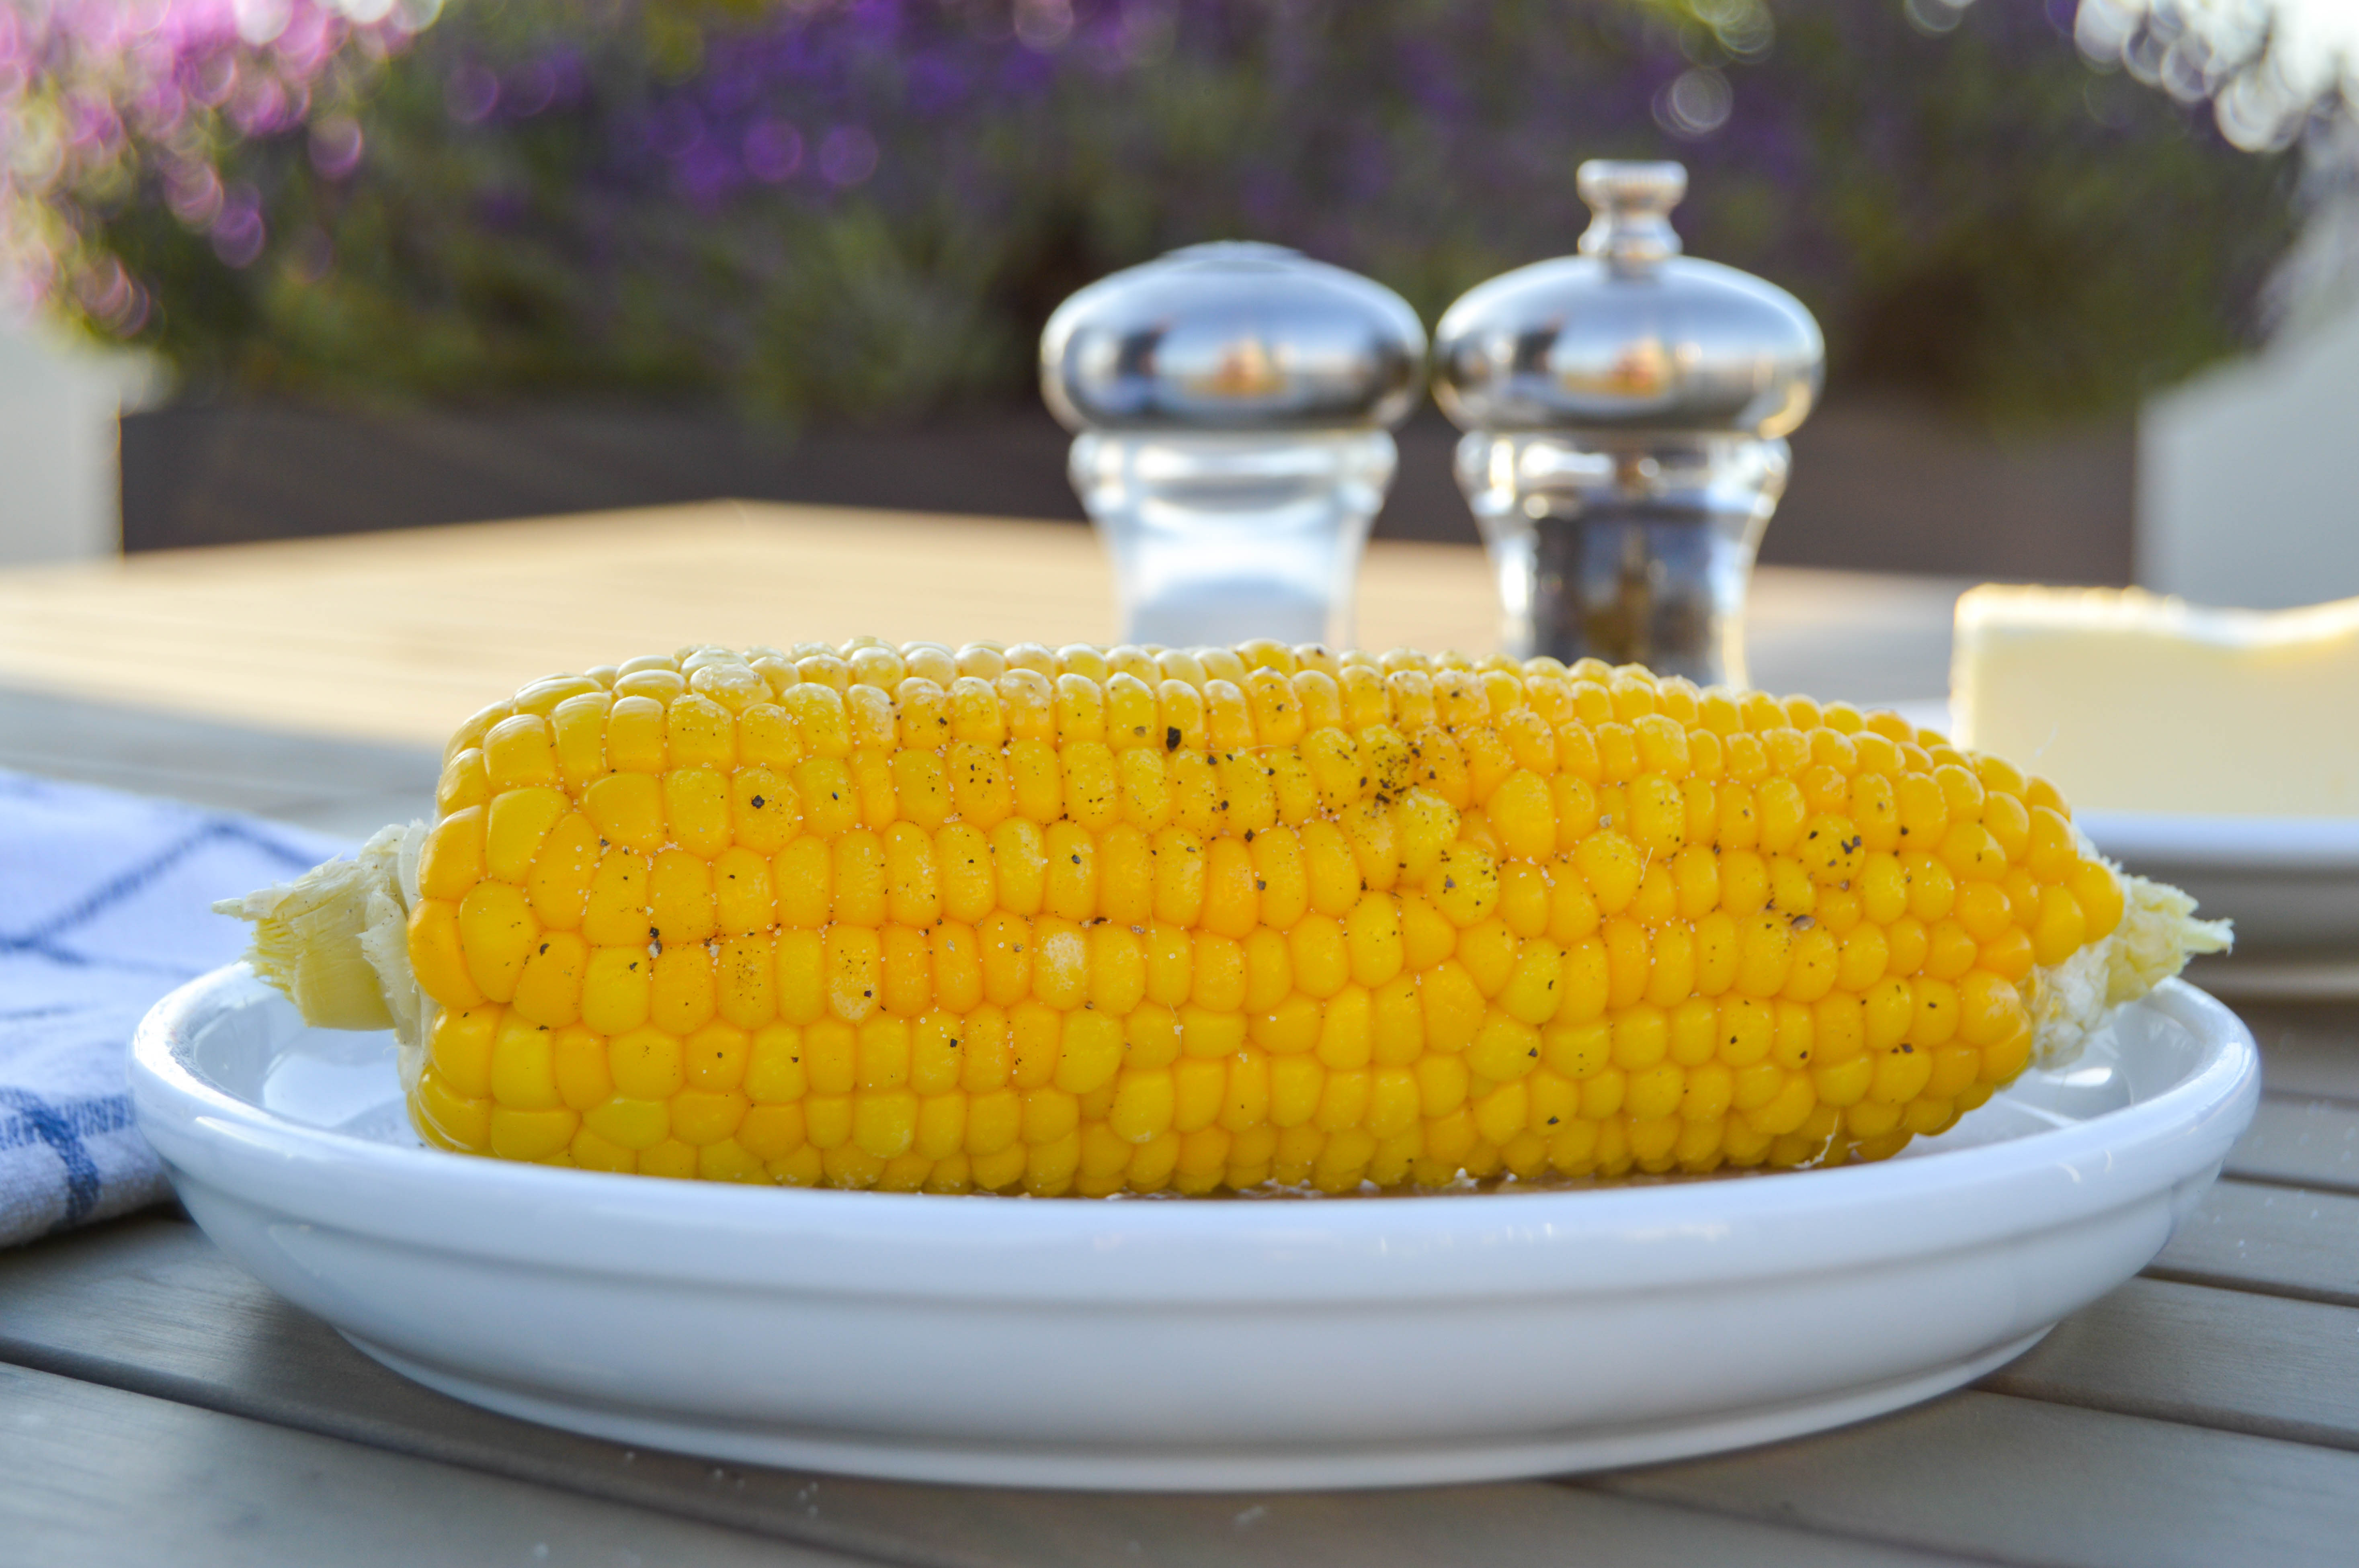 Guest writer sharing a super easy corn on the cob recipe you can make on the grill. You can even leave the husks on for grilling! Plus some corn on the cob home chef tips.